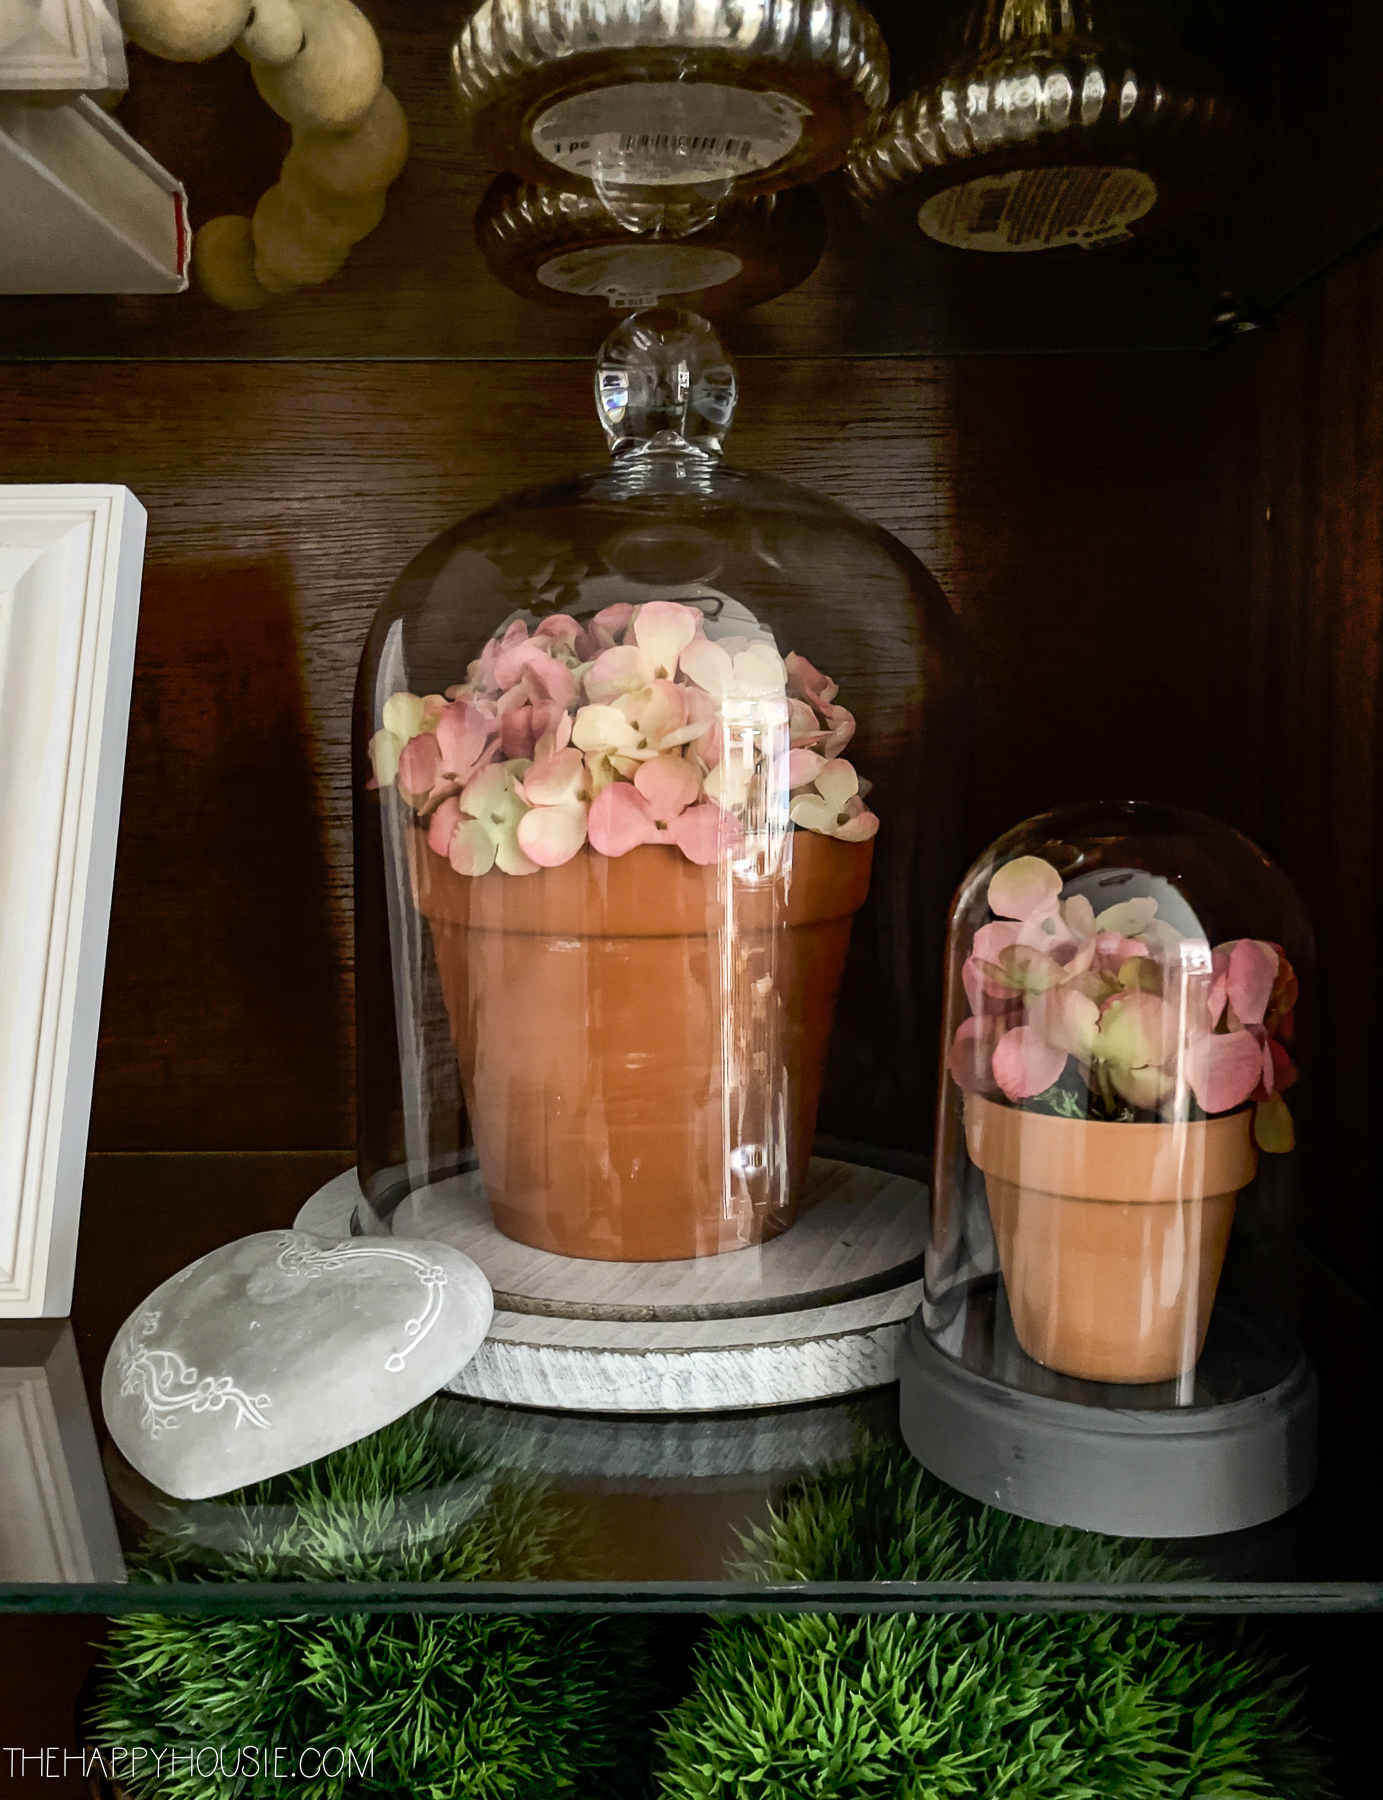 Glass cloche with pink flower pots inside them.